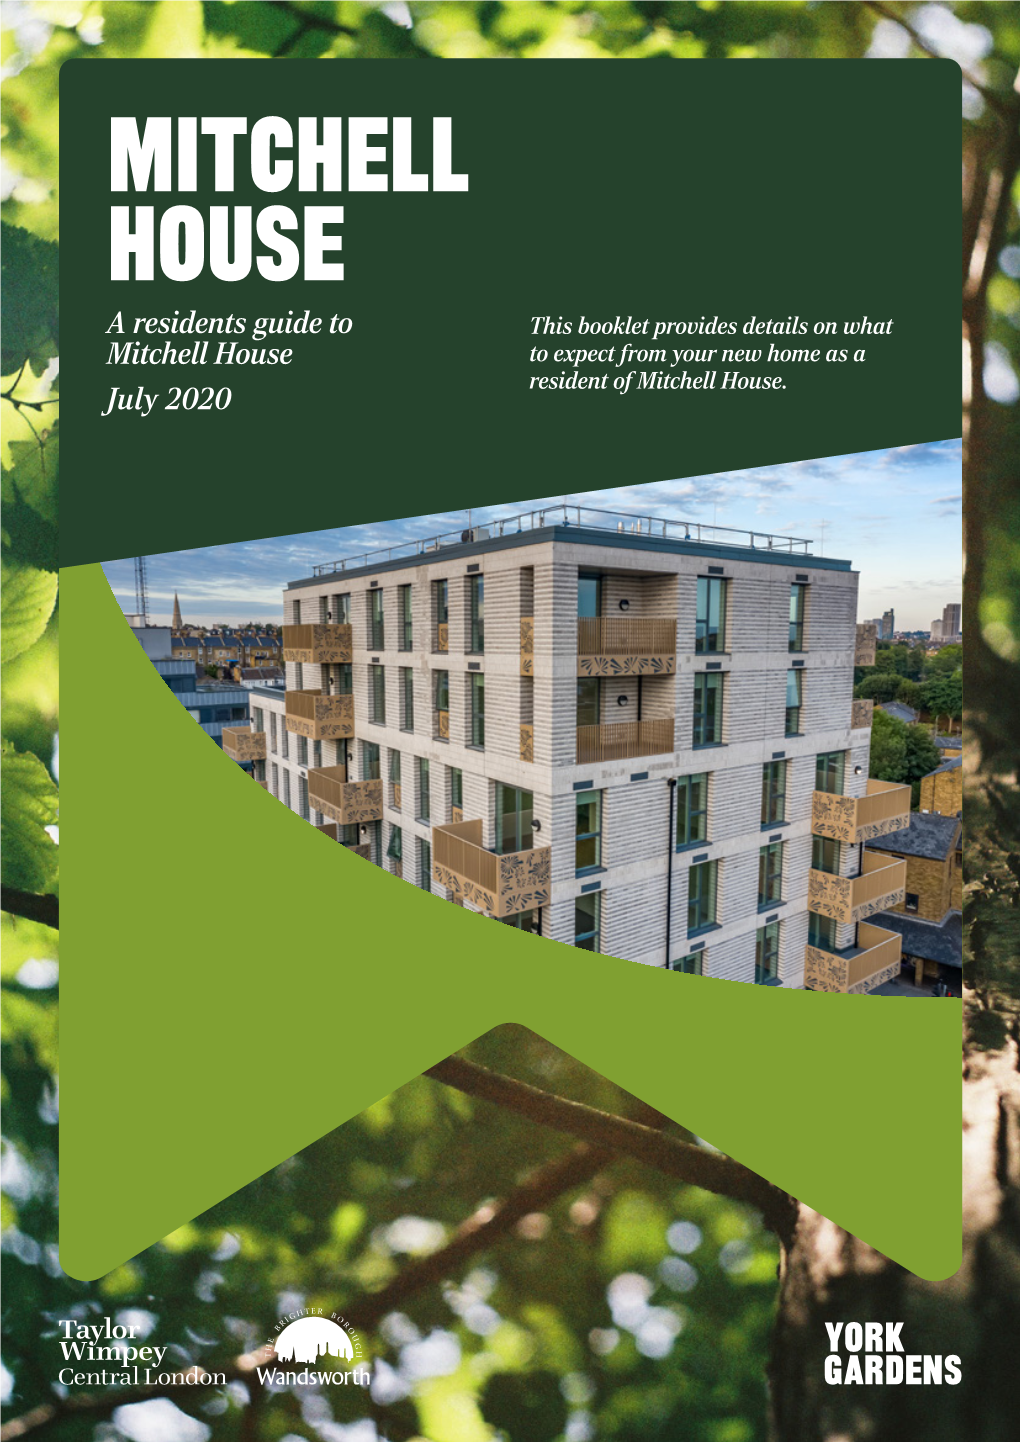 MITCHELL HOUSE a Residents Guide to This Booklet Provides Details on What Mitchell House to Expect from Your New Home As a Resident of Mitchell House